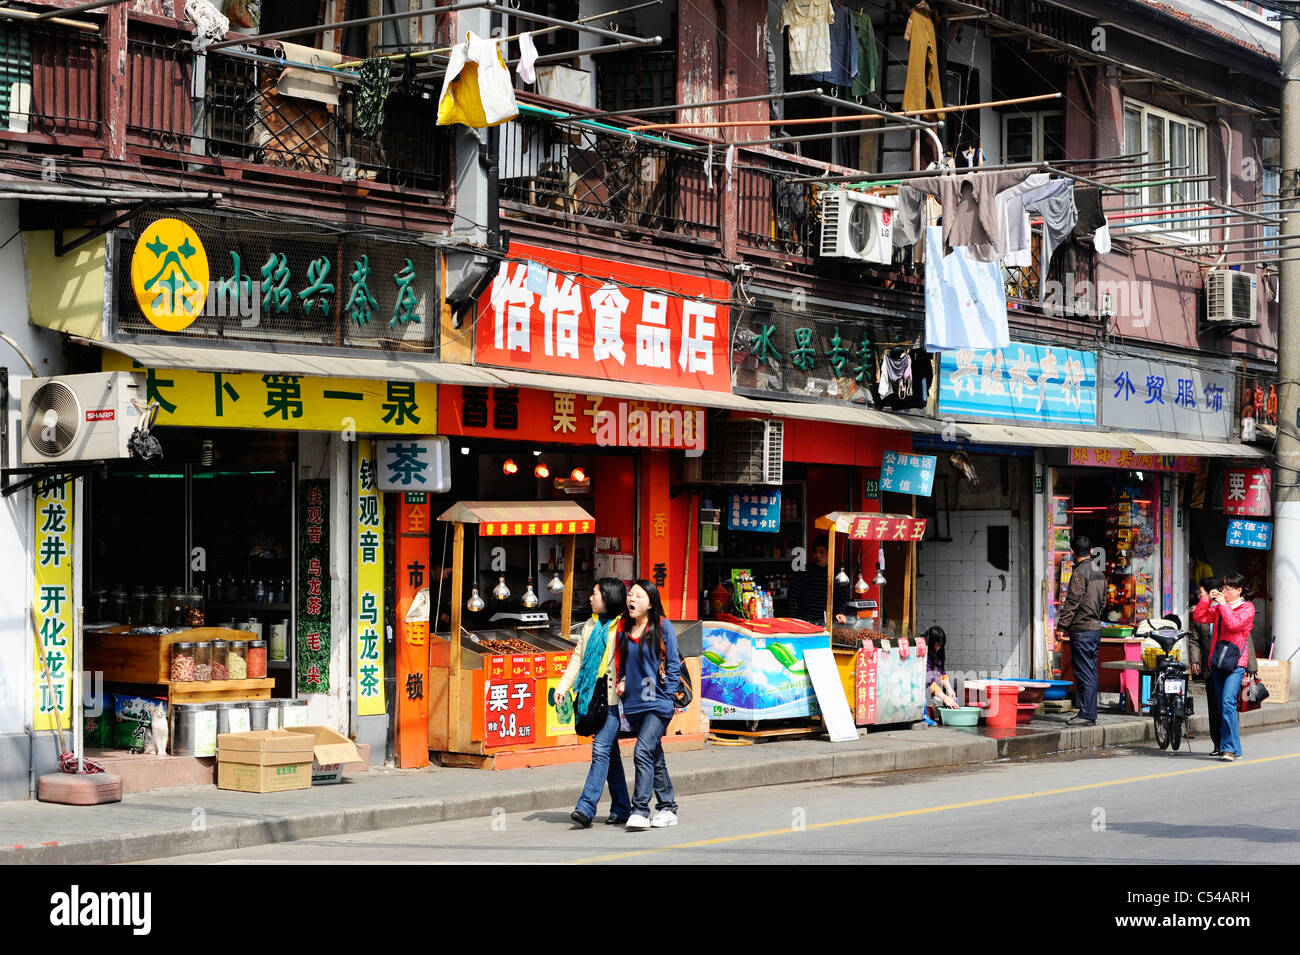 A typical street scene in old Shanghai Stock Photo